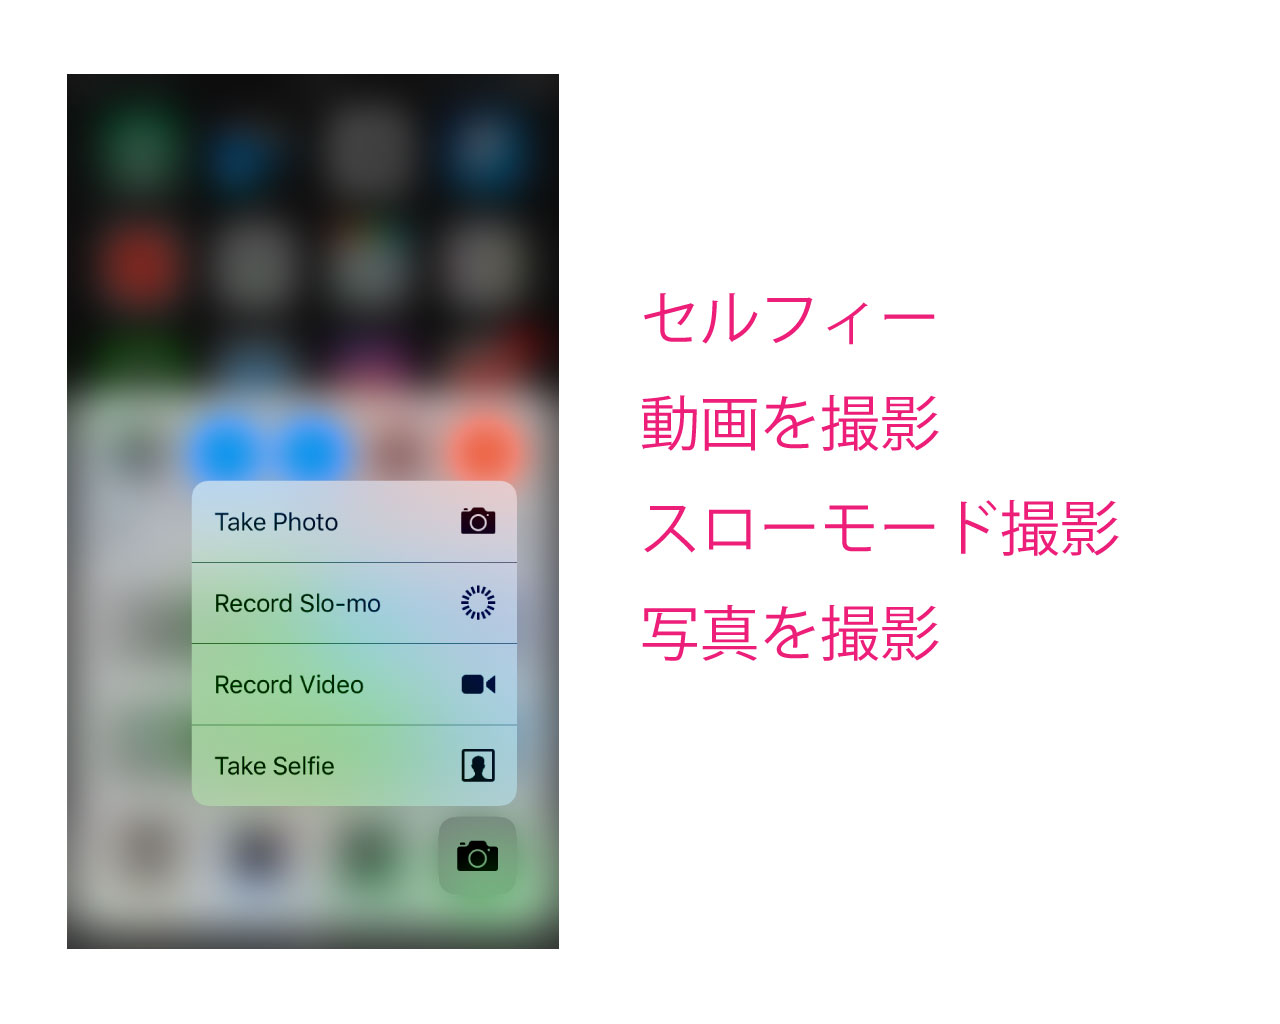 iphone-3dtouch-control-center-4